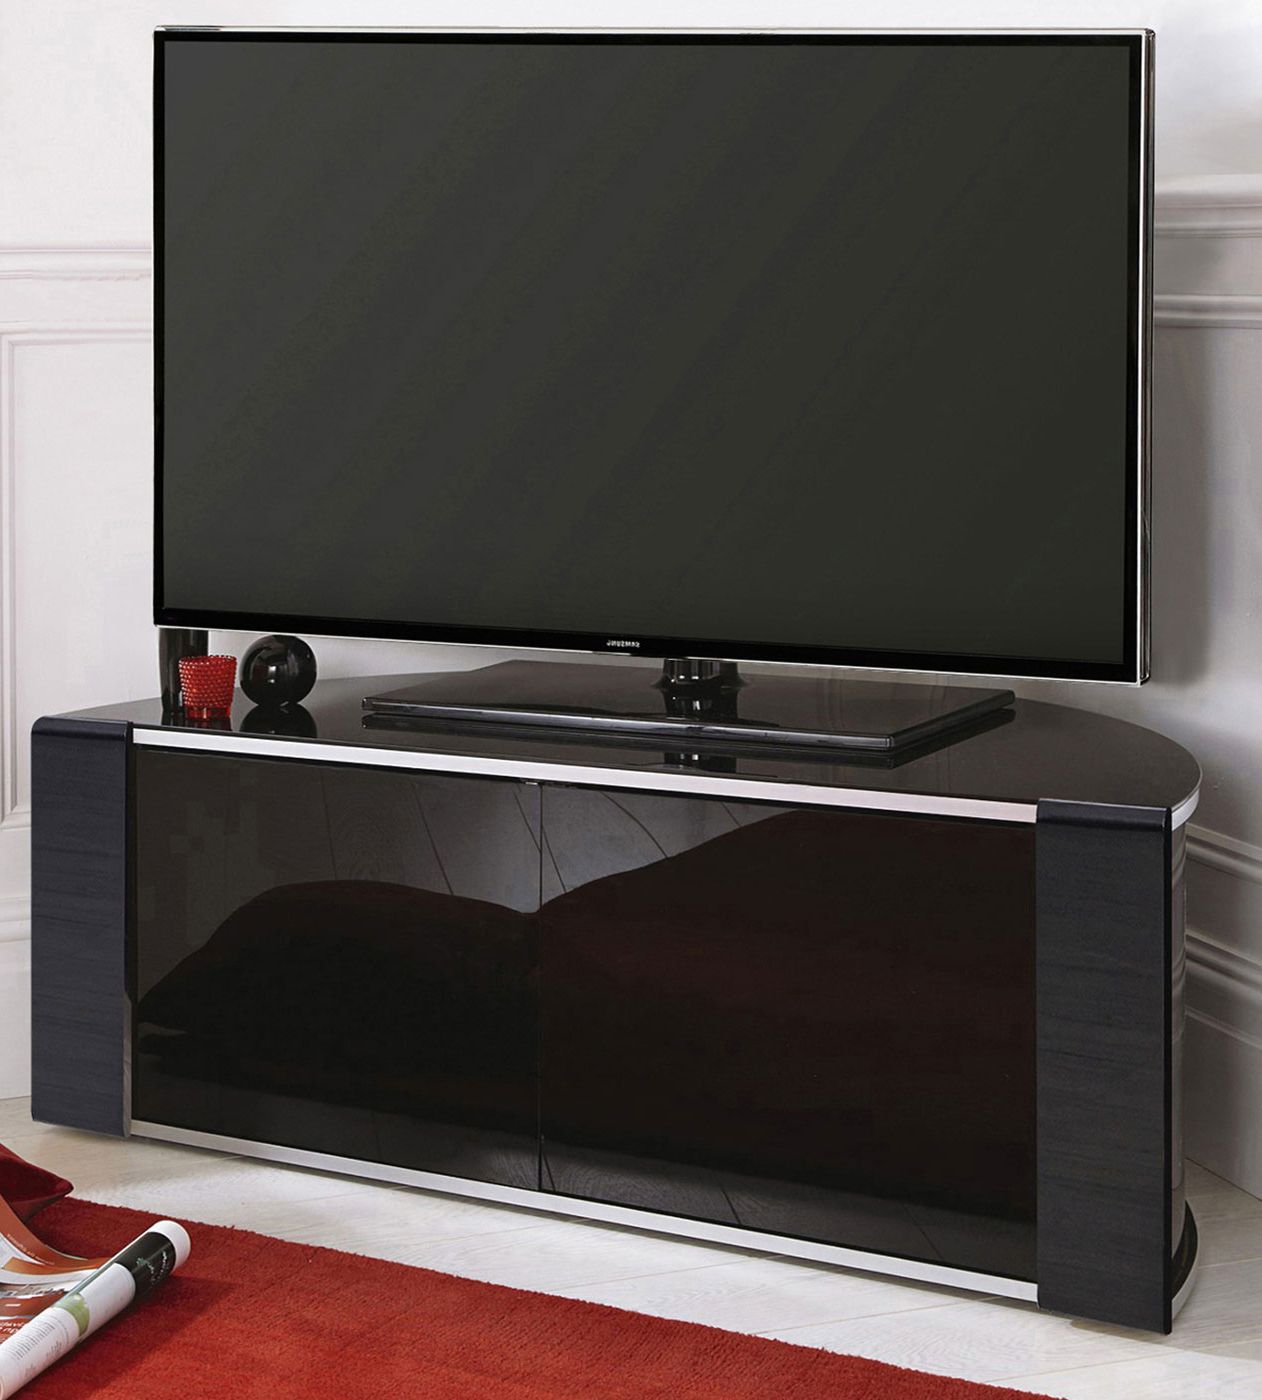 Preferred Mda Designs Sirius 850 Black Corner Glass Tv Cabinet Stand Intended For Exhibit Corner Tv Stands (Photo 9 of 10)